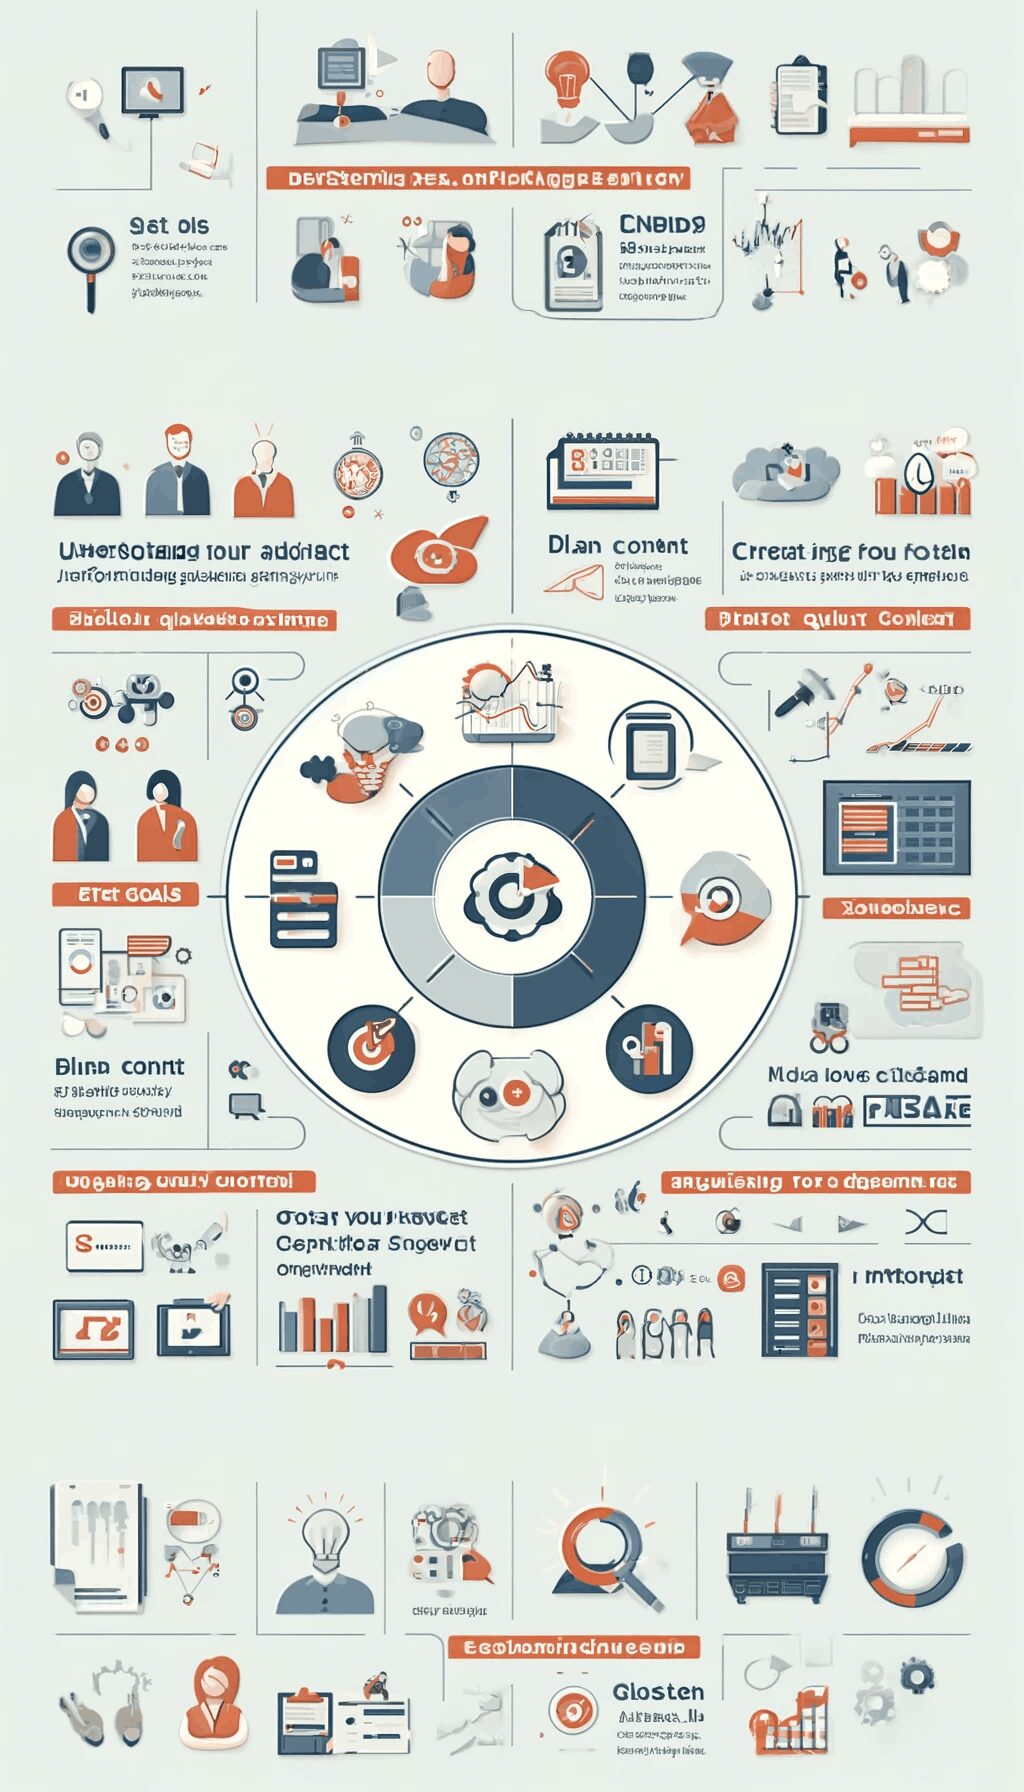 infographic illustrating the key components of a content marketing strategy. The visual elements include sections for setting goals, understanding your audience, auditing content, planning content, creating quality content, sharing content, optimizing for SEO, engaging your audience, and measuring results.